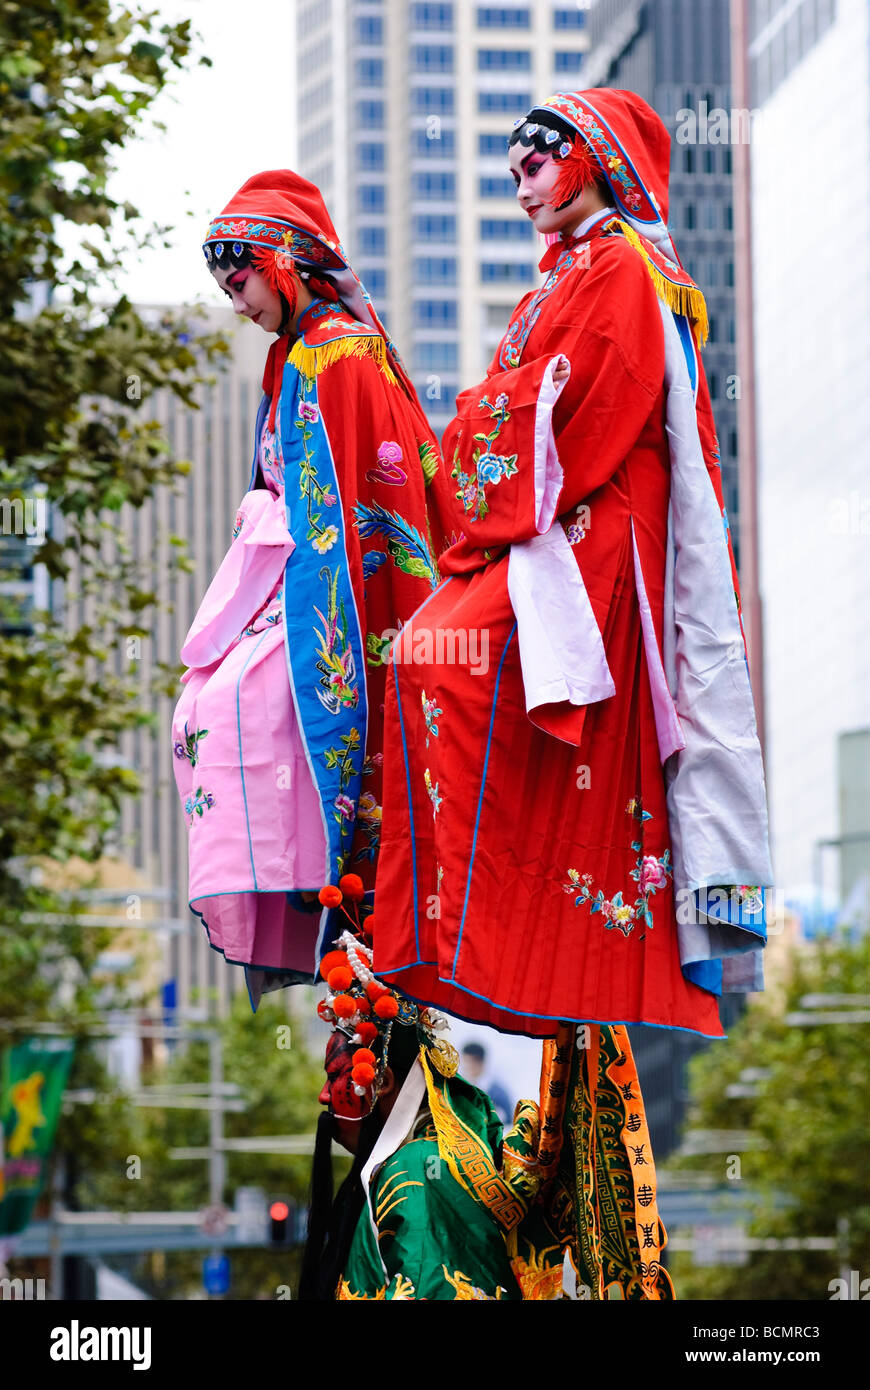 Two young Chinese women in colourful traditional costume, being carried during a Chinese New Year parade. Stock Photo